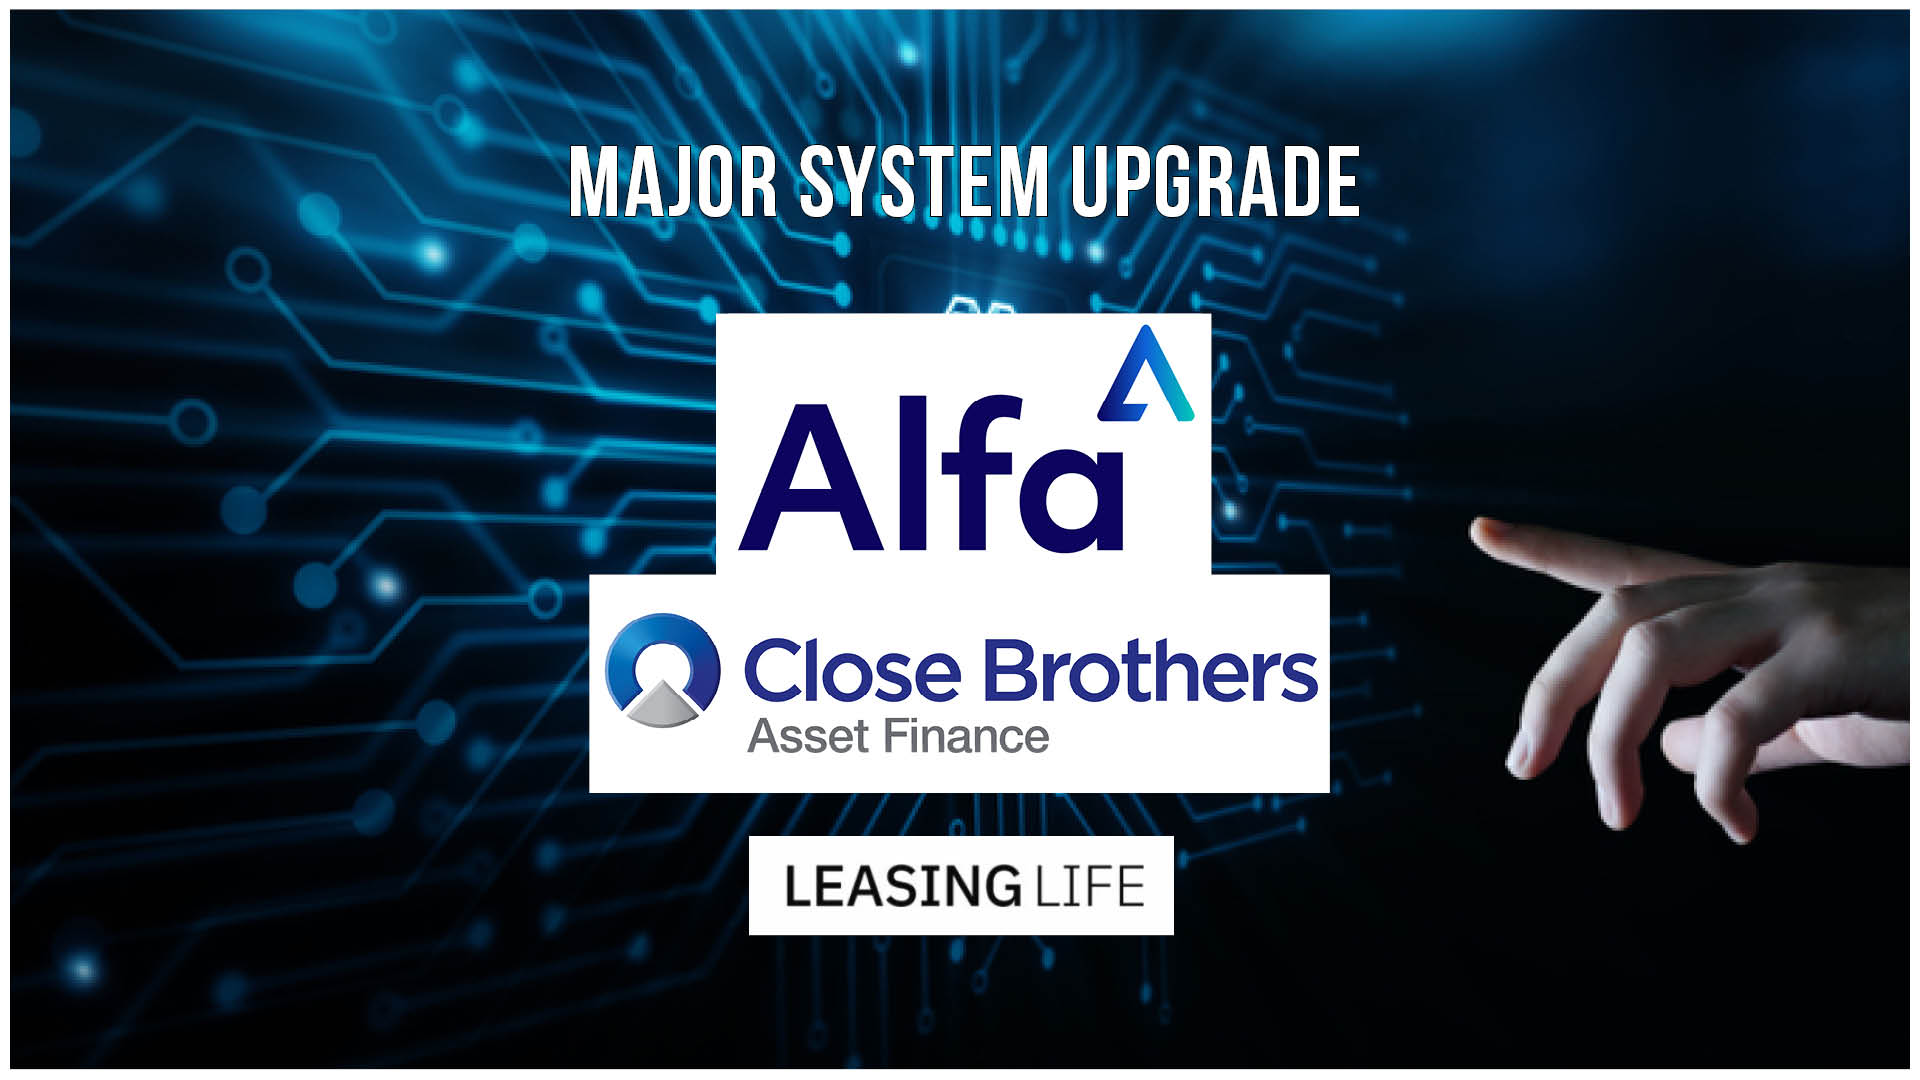 Alfa,  the provider of software platform Alfa Systems, have announced a major new upgrade with Close Brothers Asset Finance,